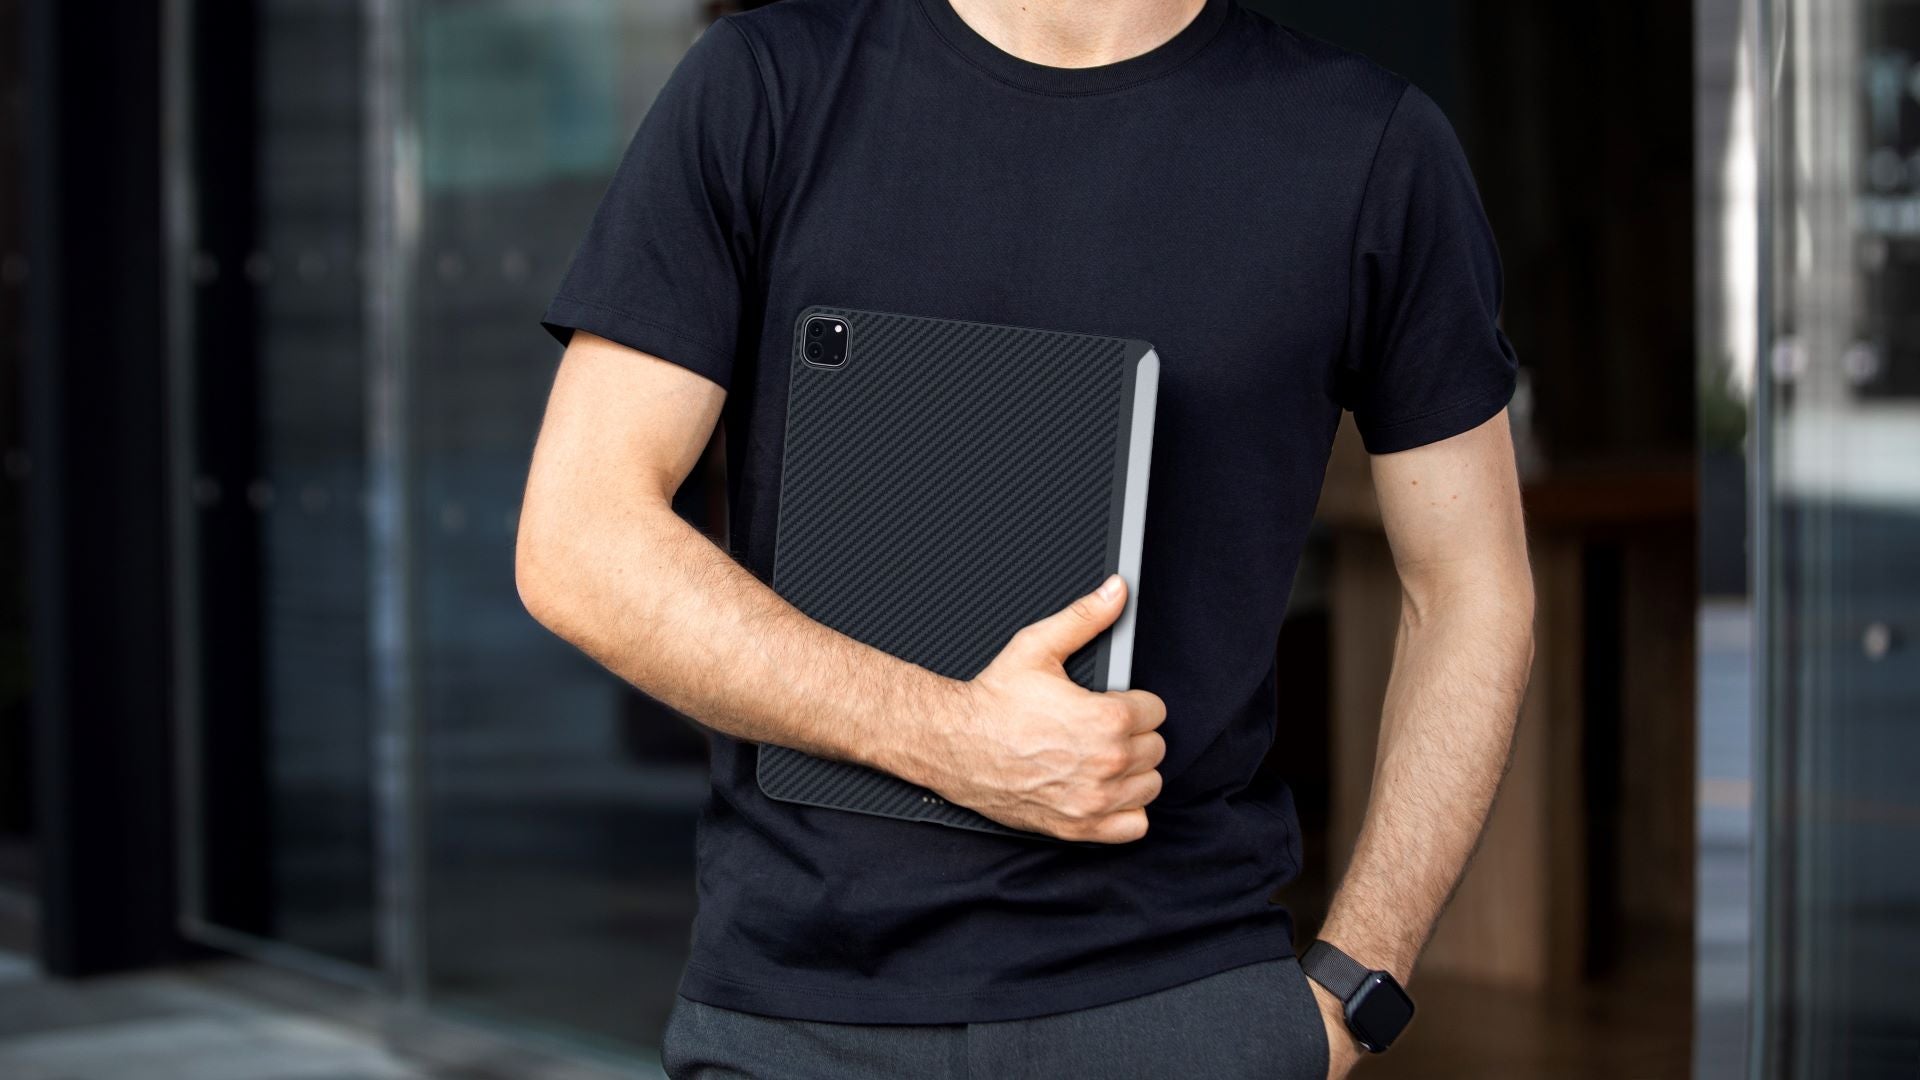 What kind of case do you use for your iPad? : r/ipad